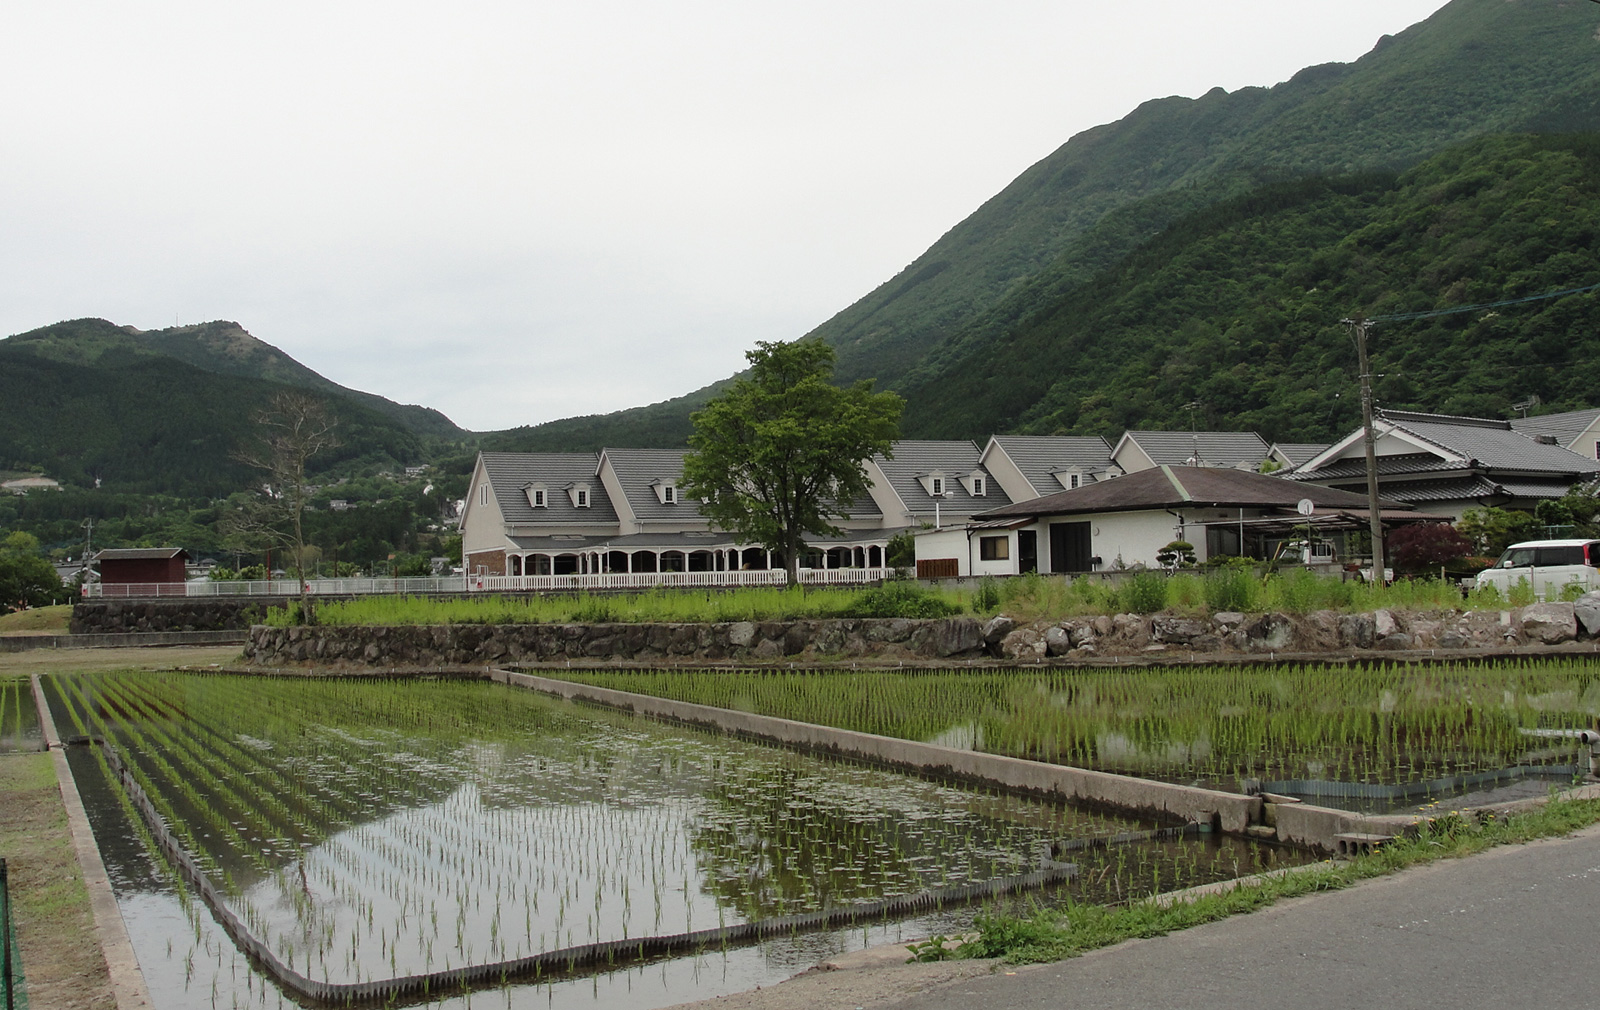 Yufuin is famous for its natural hot springs, and for its mountain surrounds. Photography: <a href="https://www.flickr.com/photos/bagelmouse/" target="_blank">RachelH_</a>